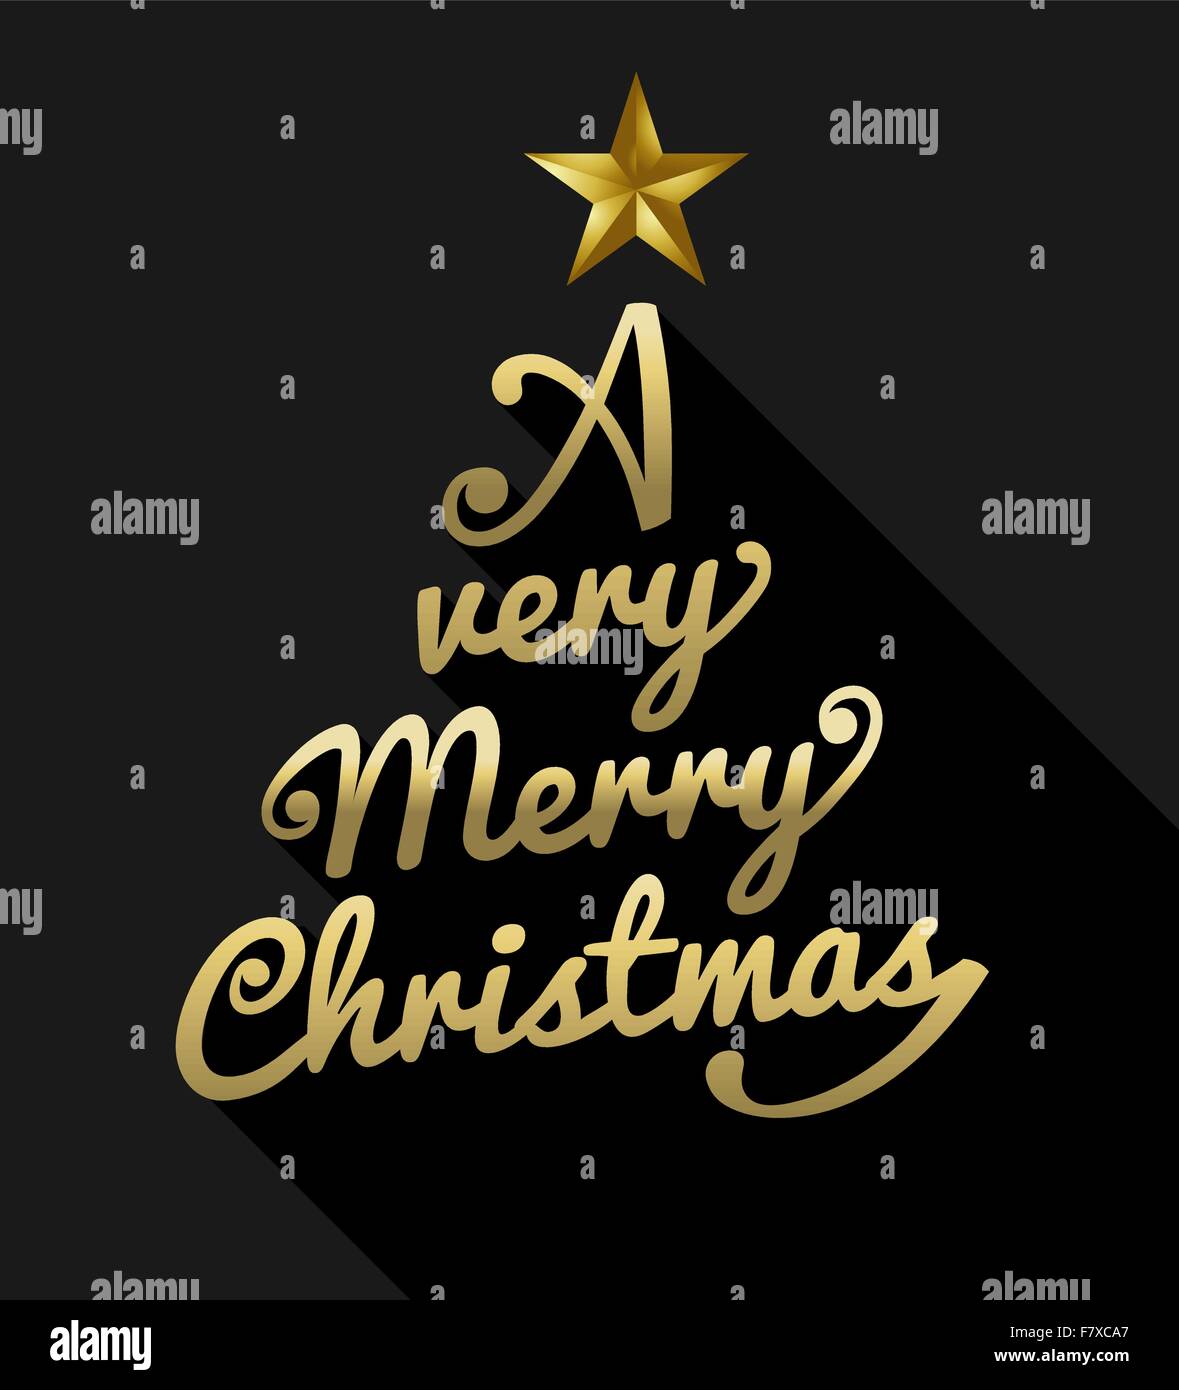 Merry christmas design with gold text making xmas pine tree shape. Ideal for holiday greeting card, poster or web. EPS10 vector. Stock Vector